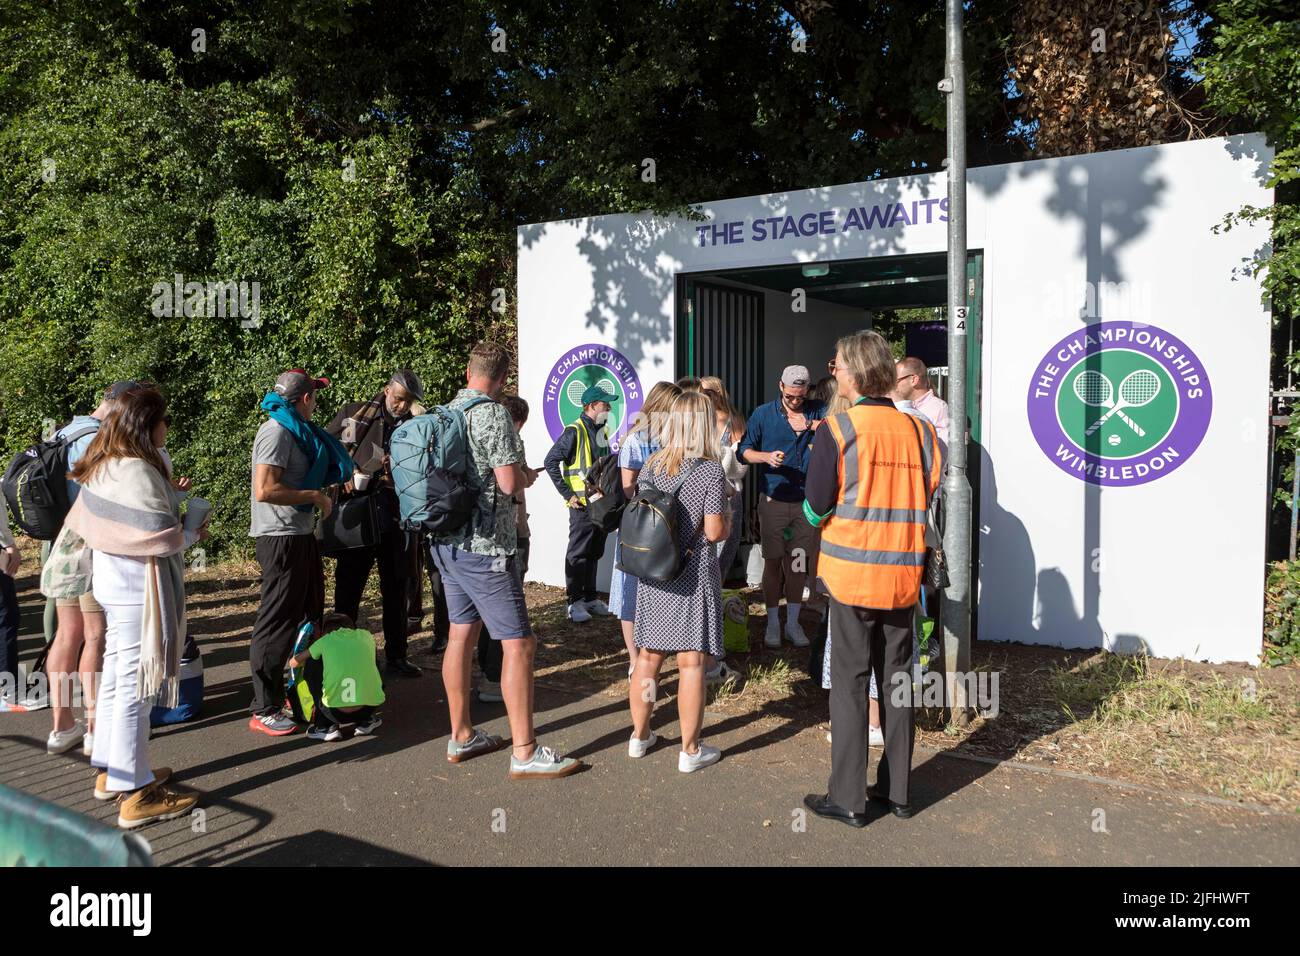 Tennis fans form long queues at Wimbledon Park this morning for tickets ahead of The Championship.   Image shot on 27th June 2022.  © Belinda Jiao   j Stock Photo